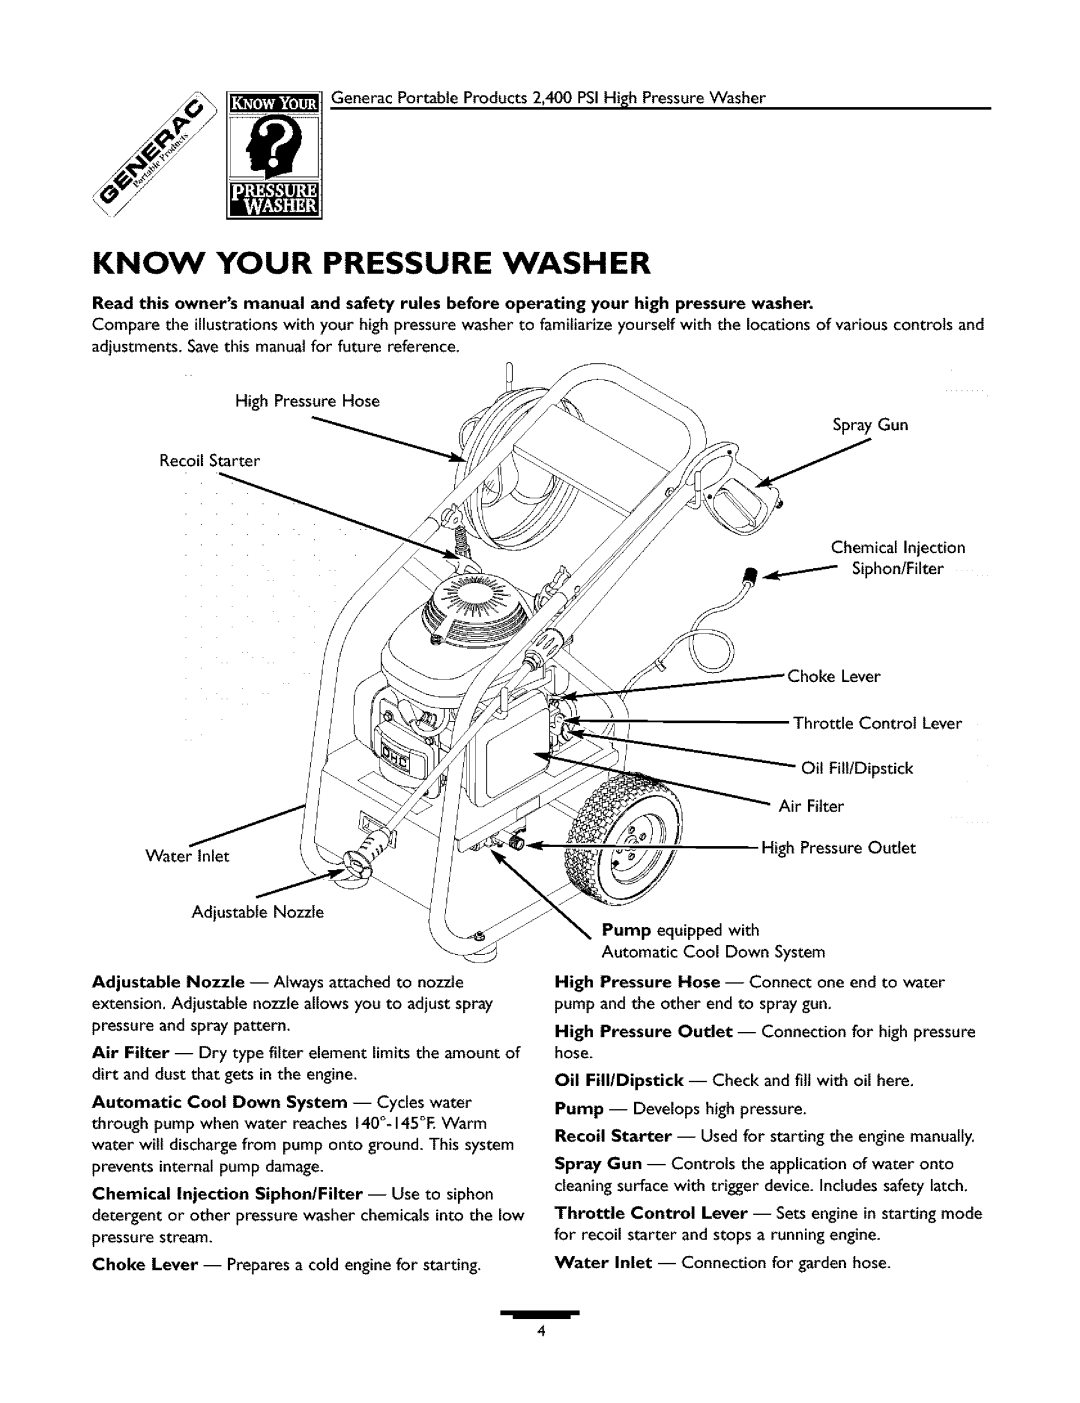 Generac 1537-0 owner manual Know Your Pressure Washer, GeneracPortableProducts2,400PSIHighPressureWasher 